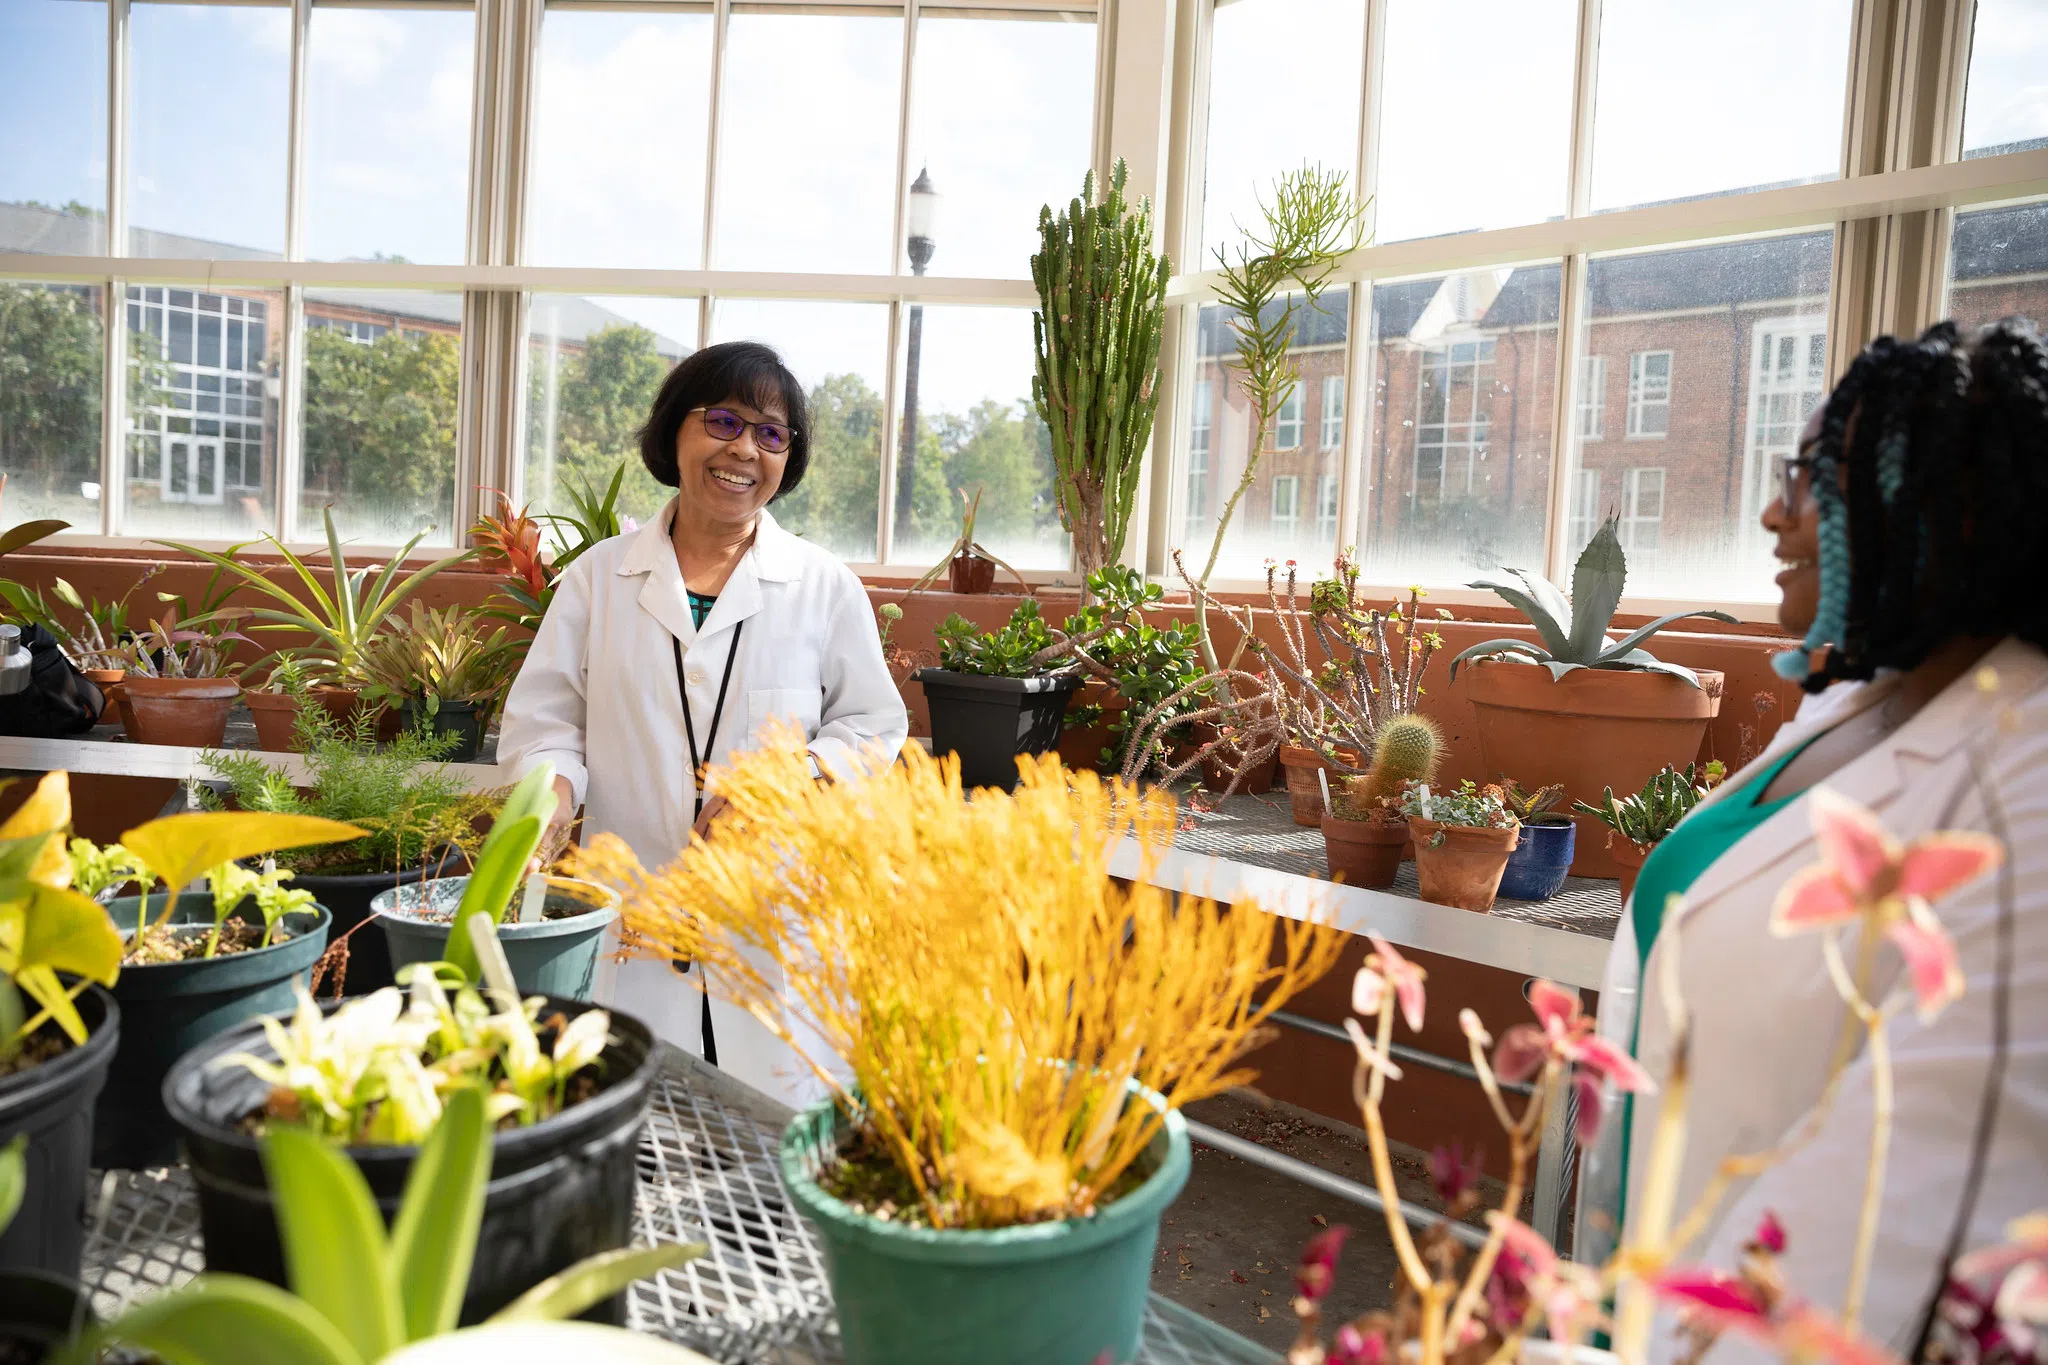 A variety of potted plants fill the foreground and background while a smiling professor admires them in front of large windows.